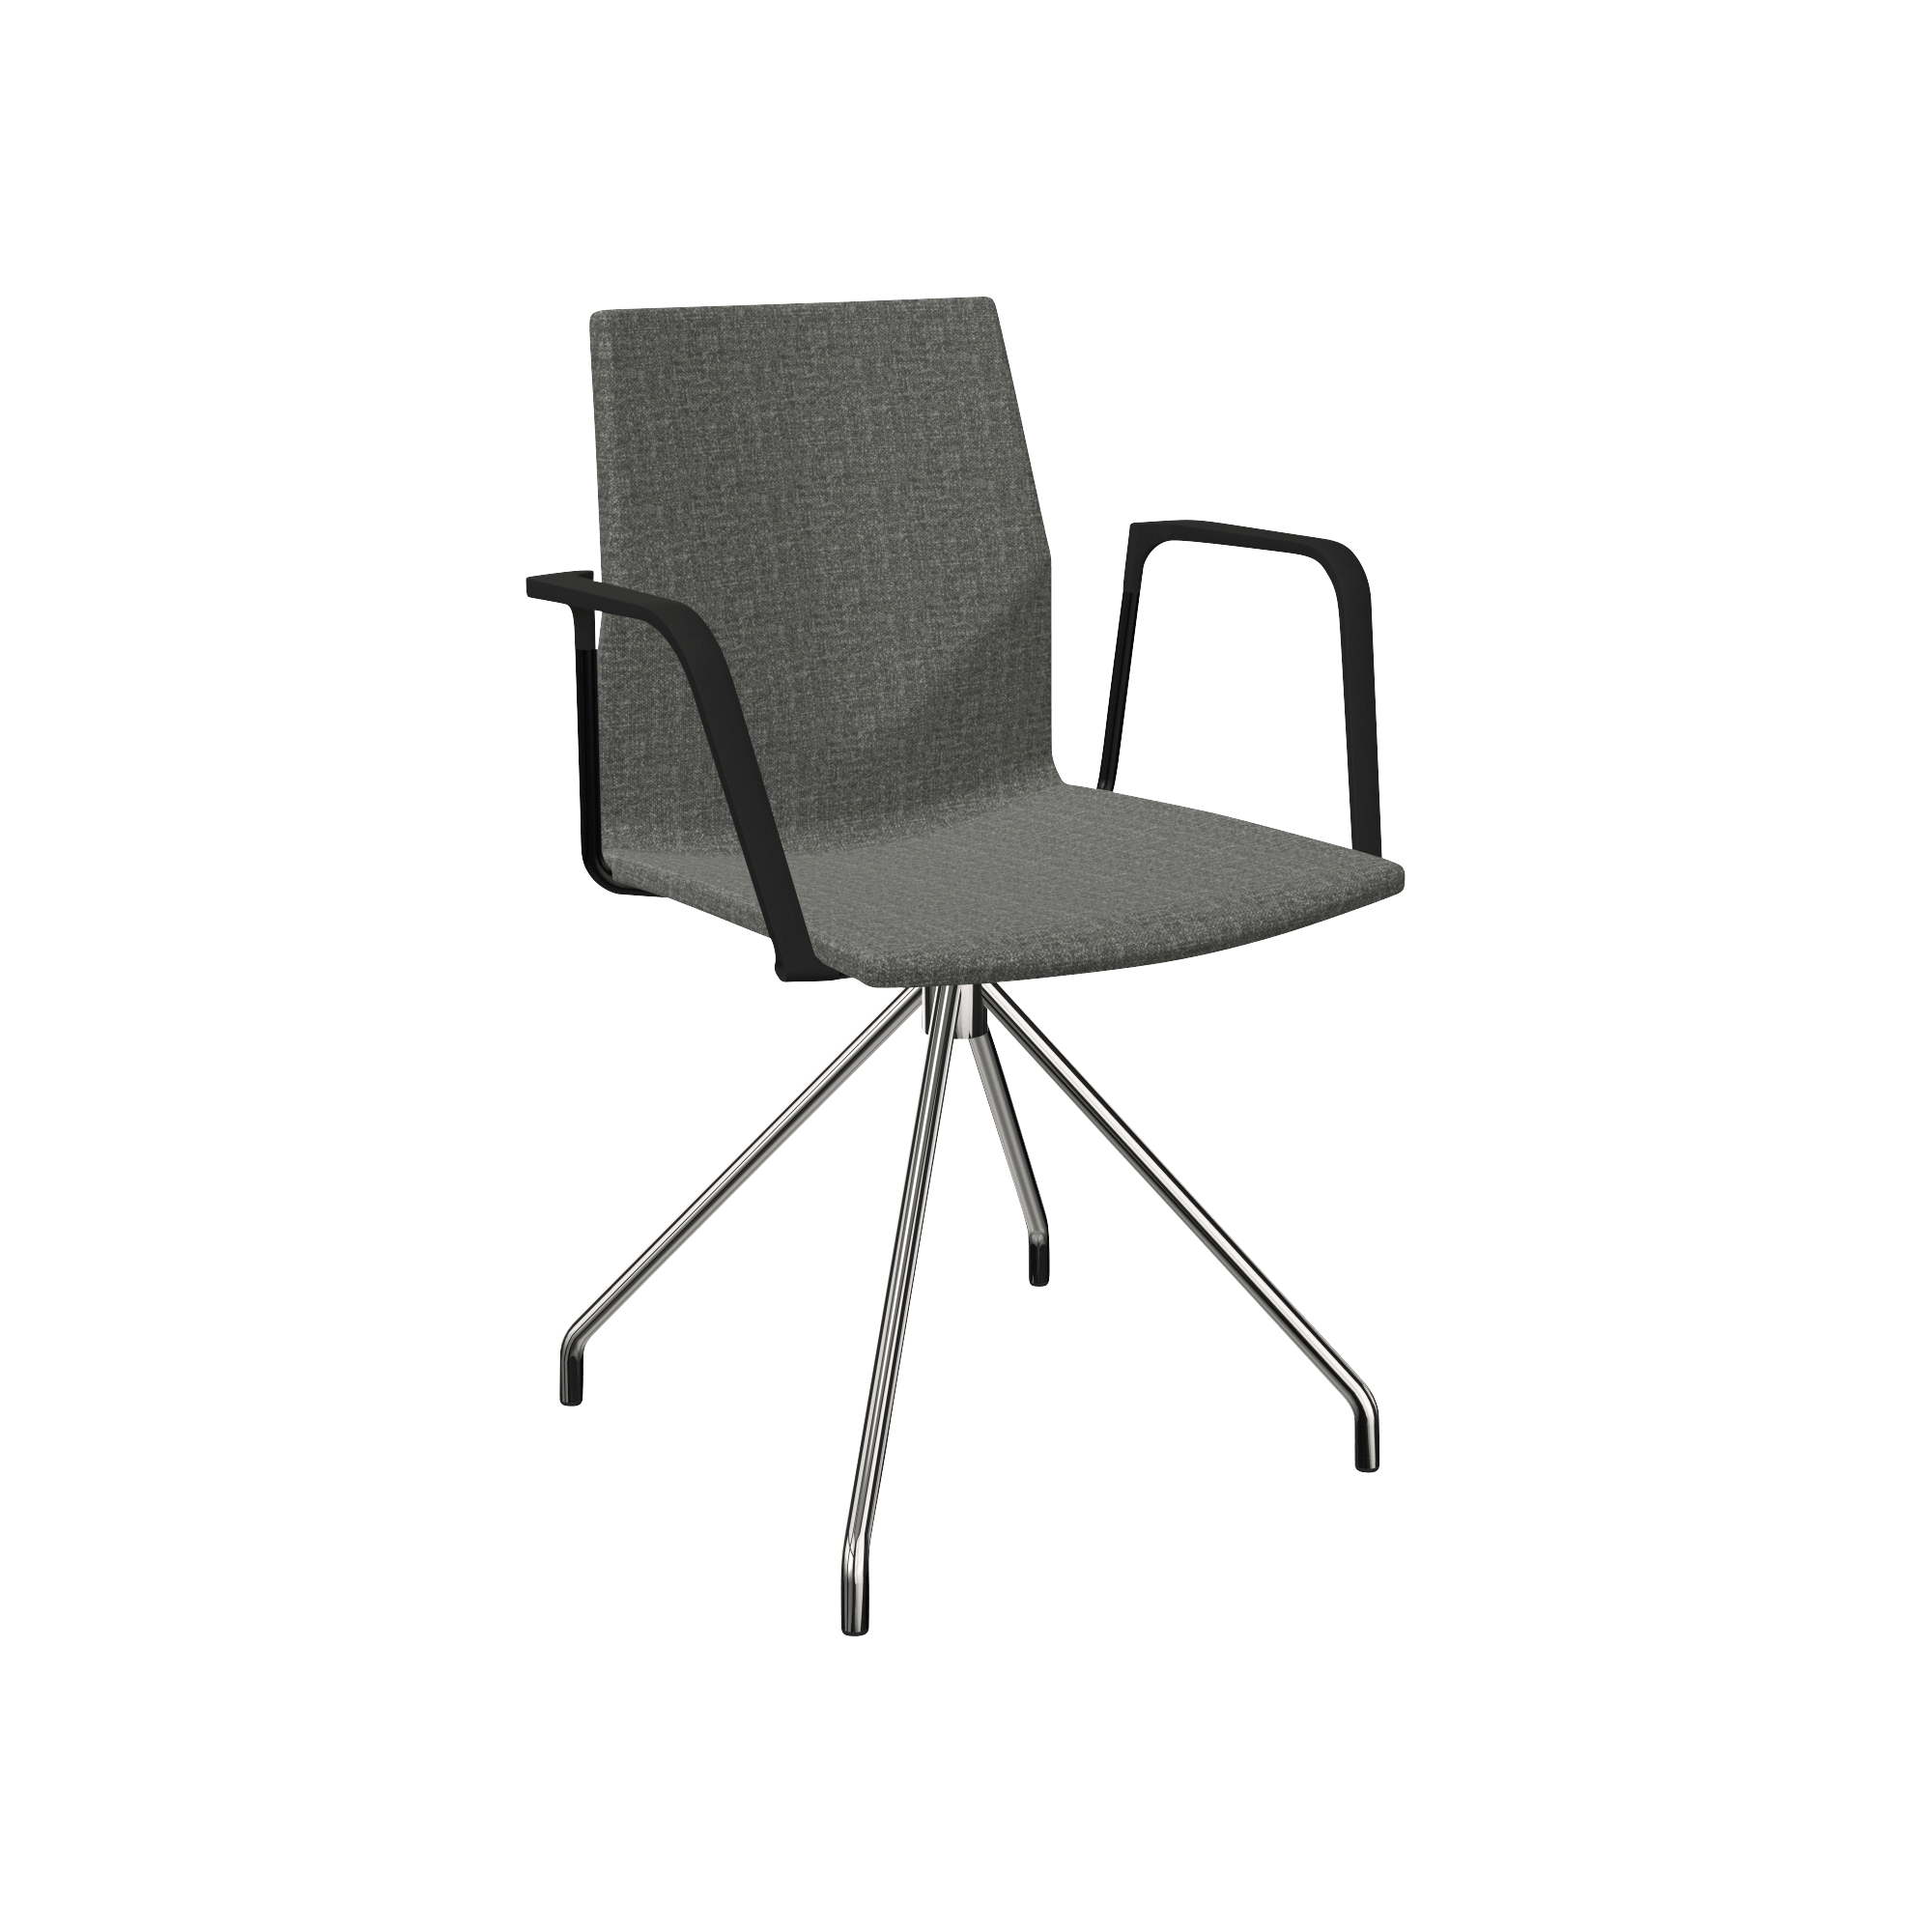 Grey chair with black arm rests and chrome leg